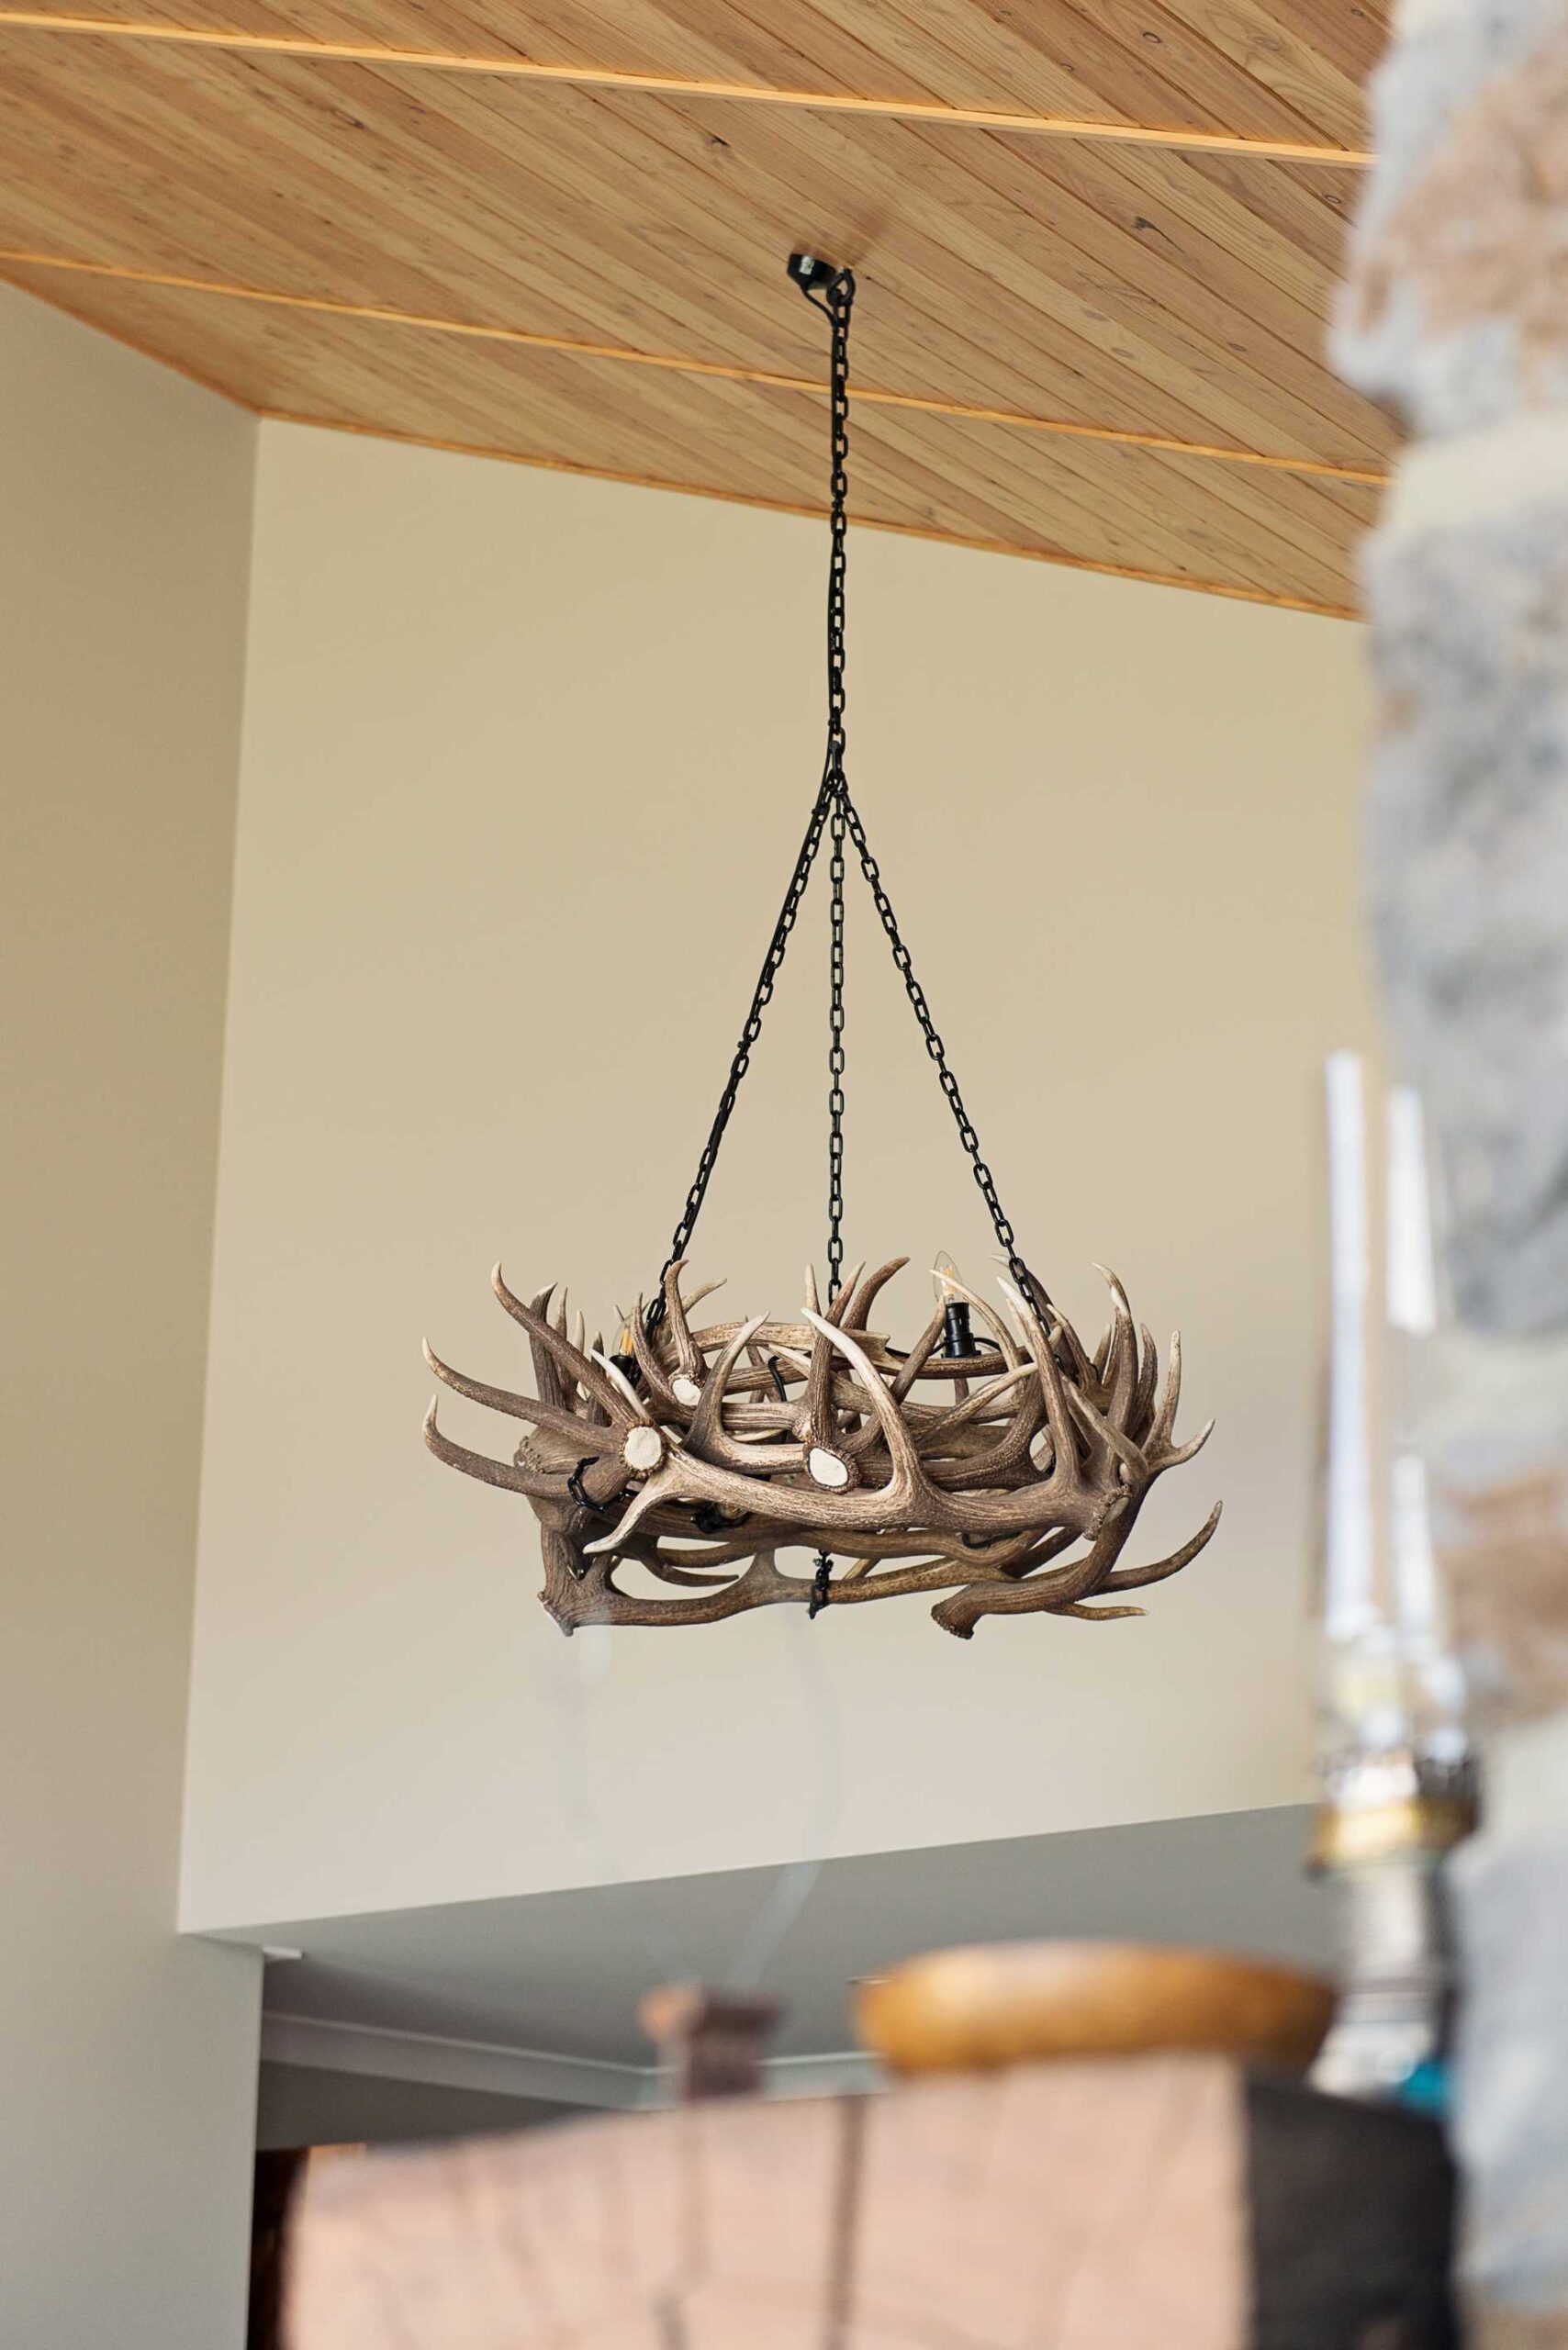  My clever clients made their own light fitting with deer antlers from their farm